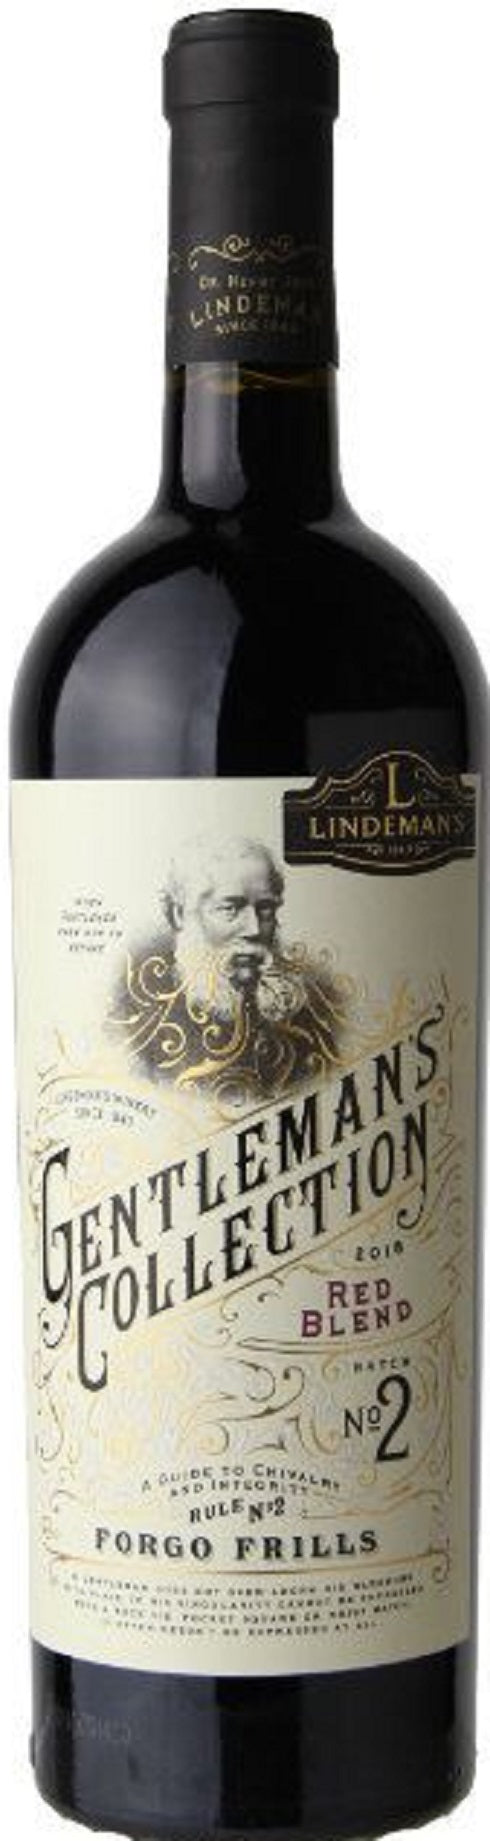 Gentleman's Collection Red Blend 2018